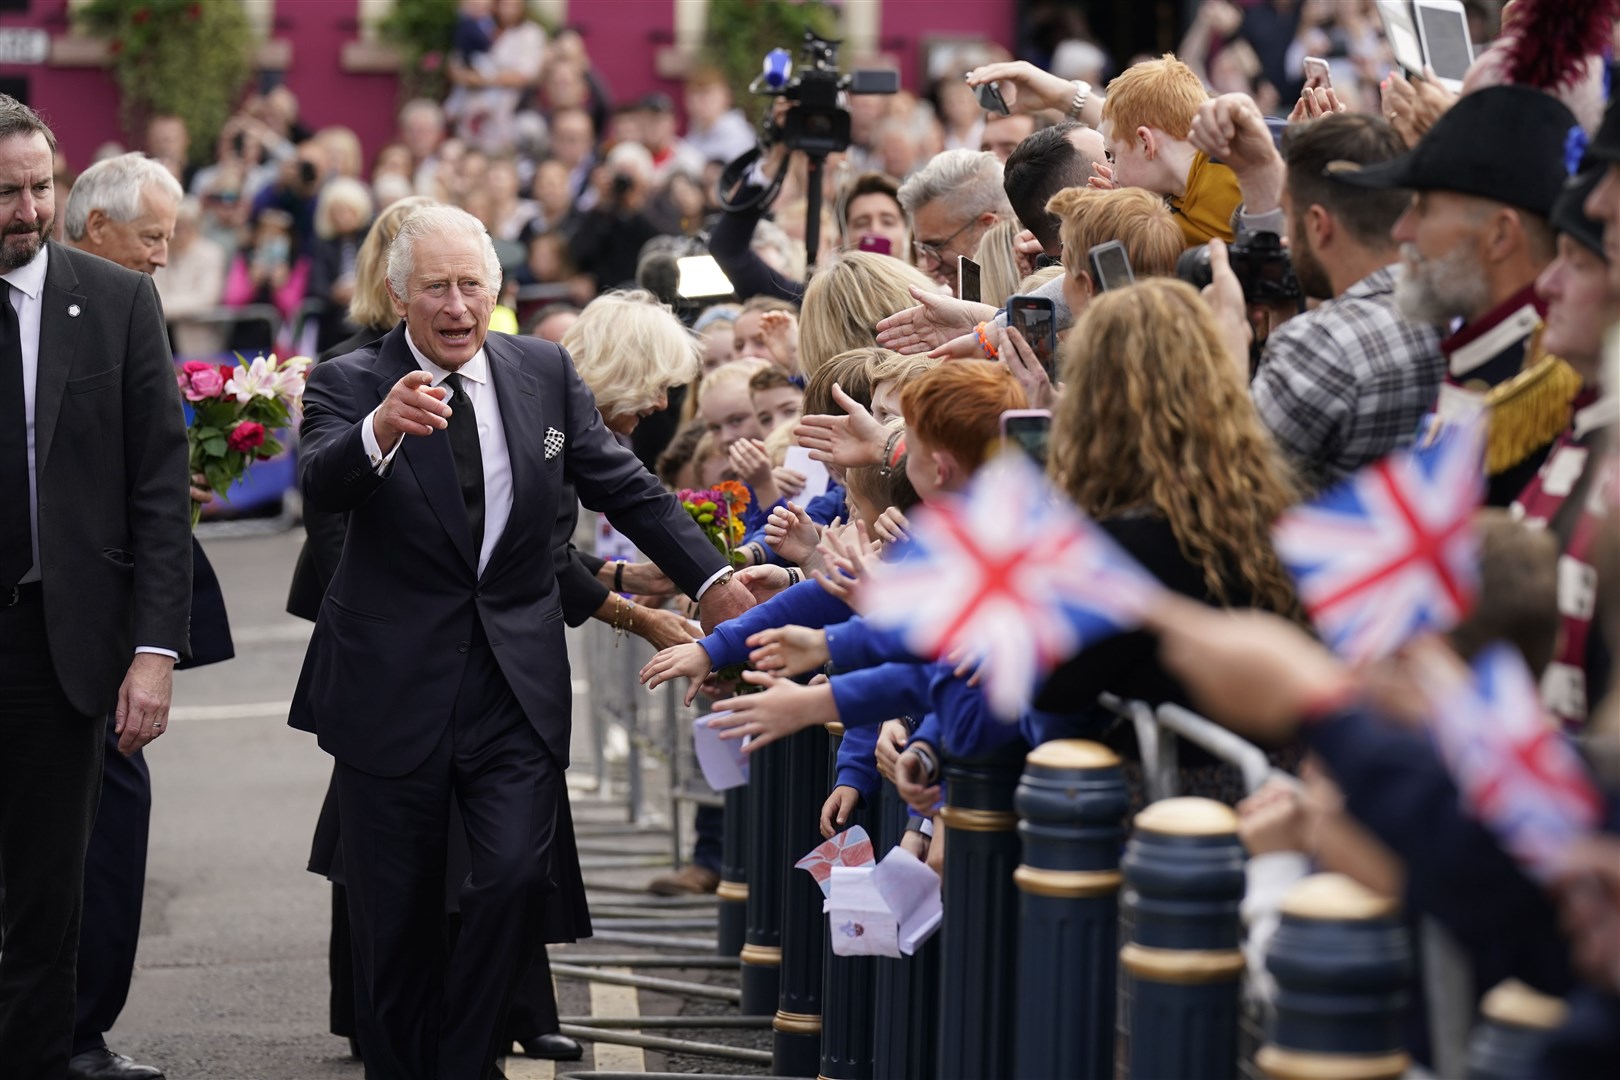 Charles meets wellwishers at Hillsborough Castle (Niall Carson/PA)